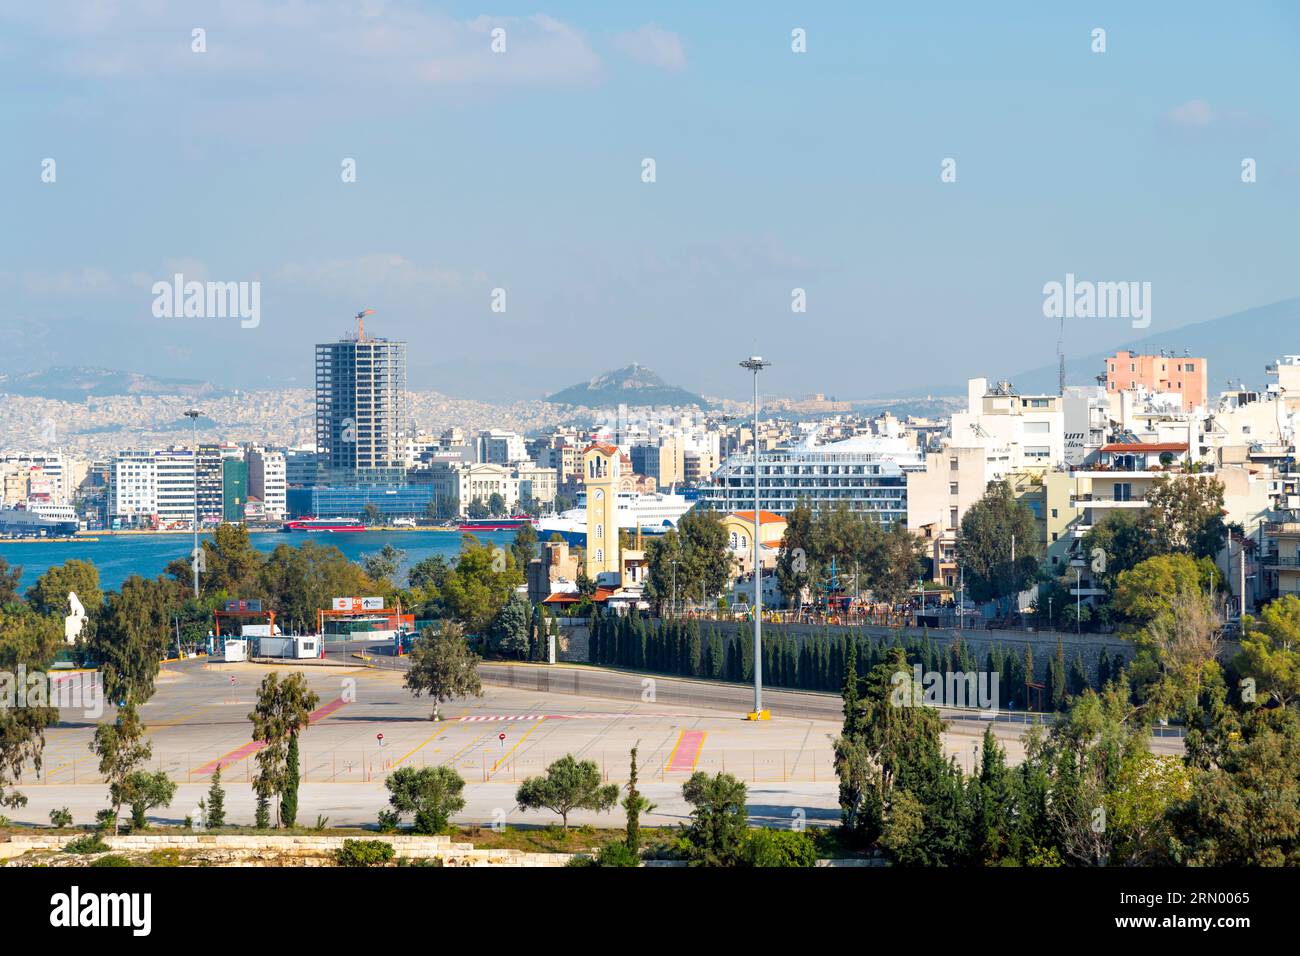 View of Athens, Parthenon Temple and the Propylaea Gate on Acropolis Hill, with Mount Lycabettus behind, from the Piraeus Greece cruise port. Stock Photo